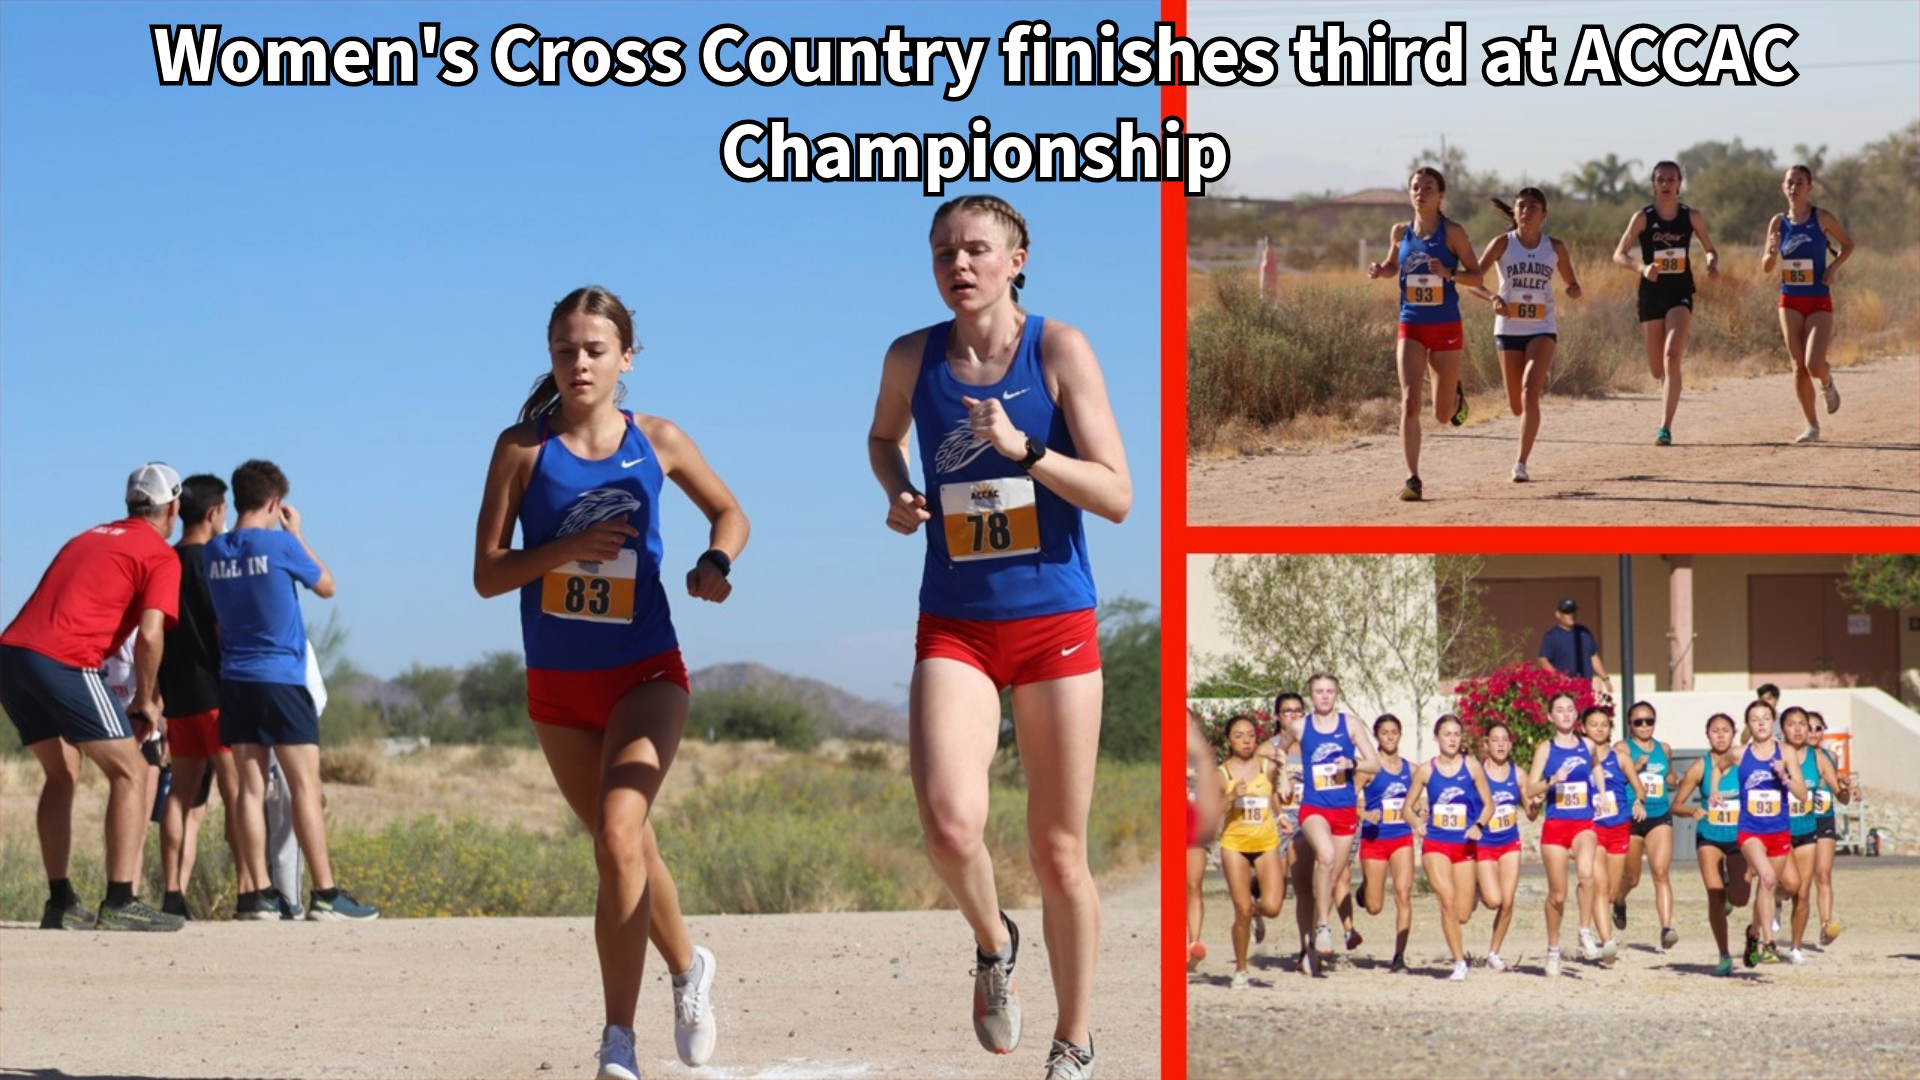 Women's Cross Country finishes third at ACCAC Championships on Saturday